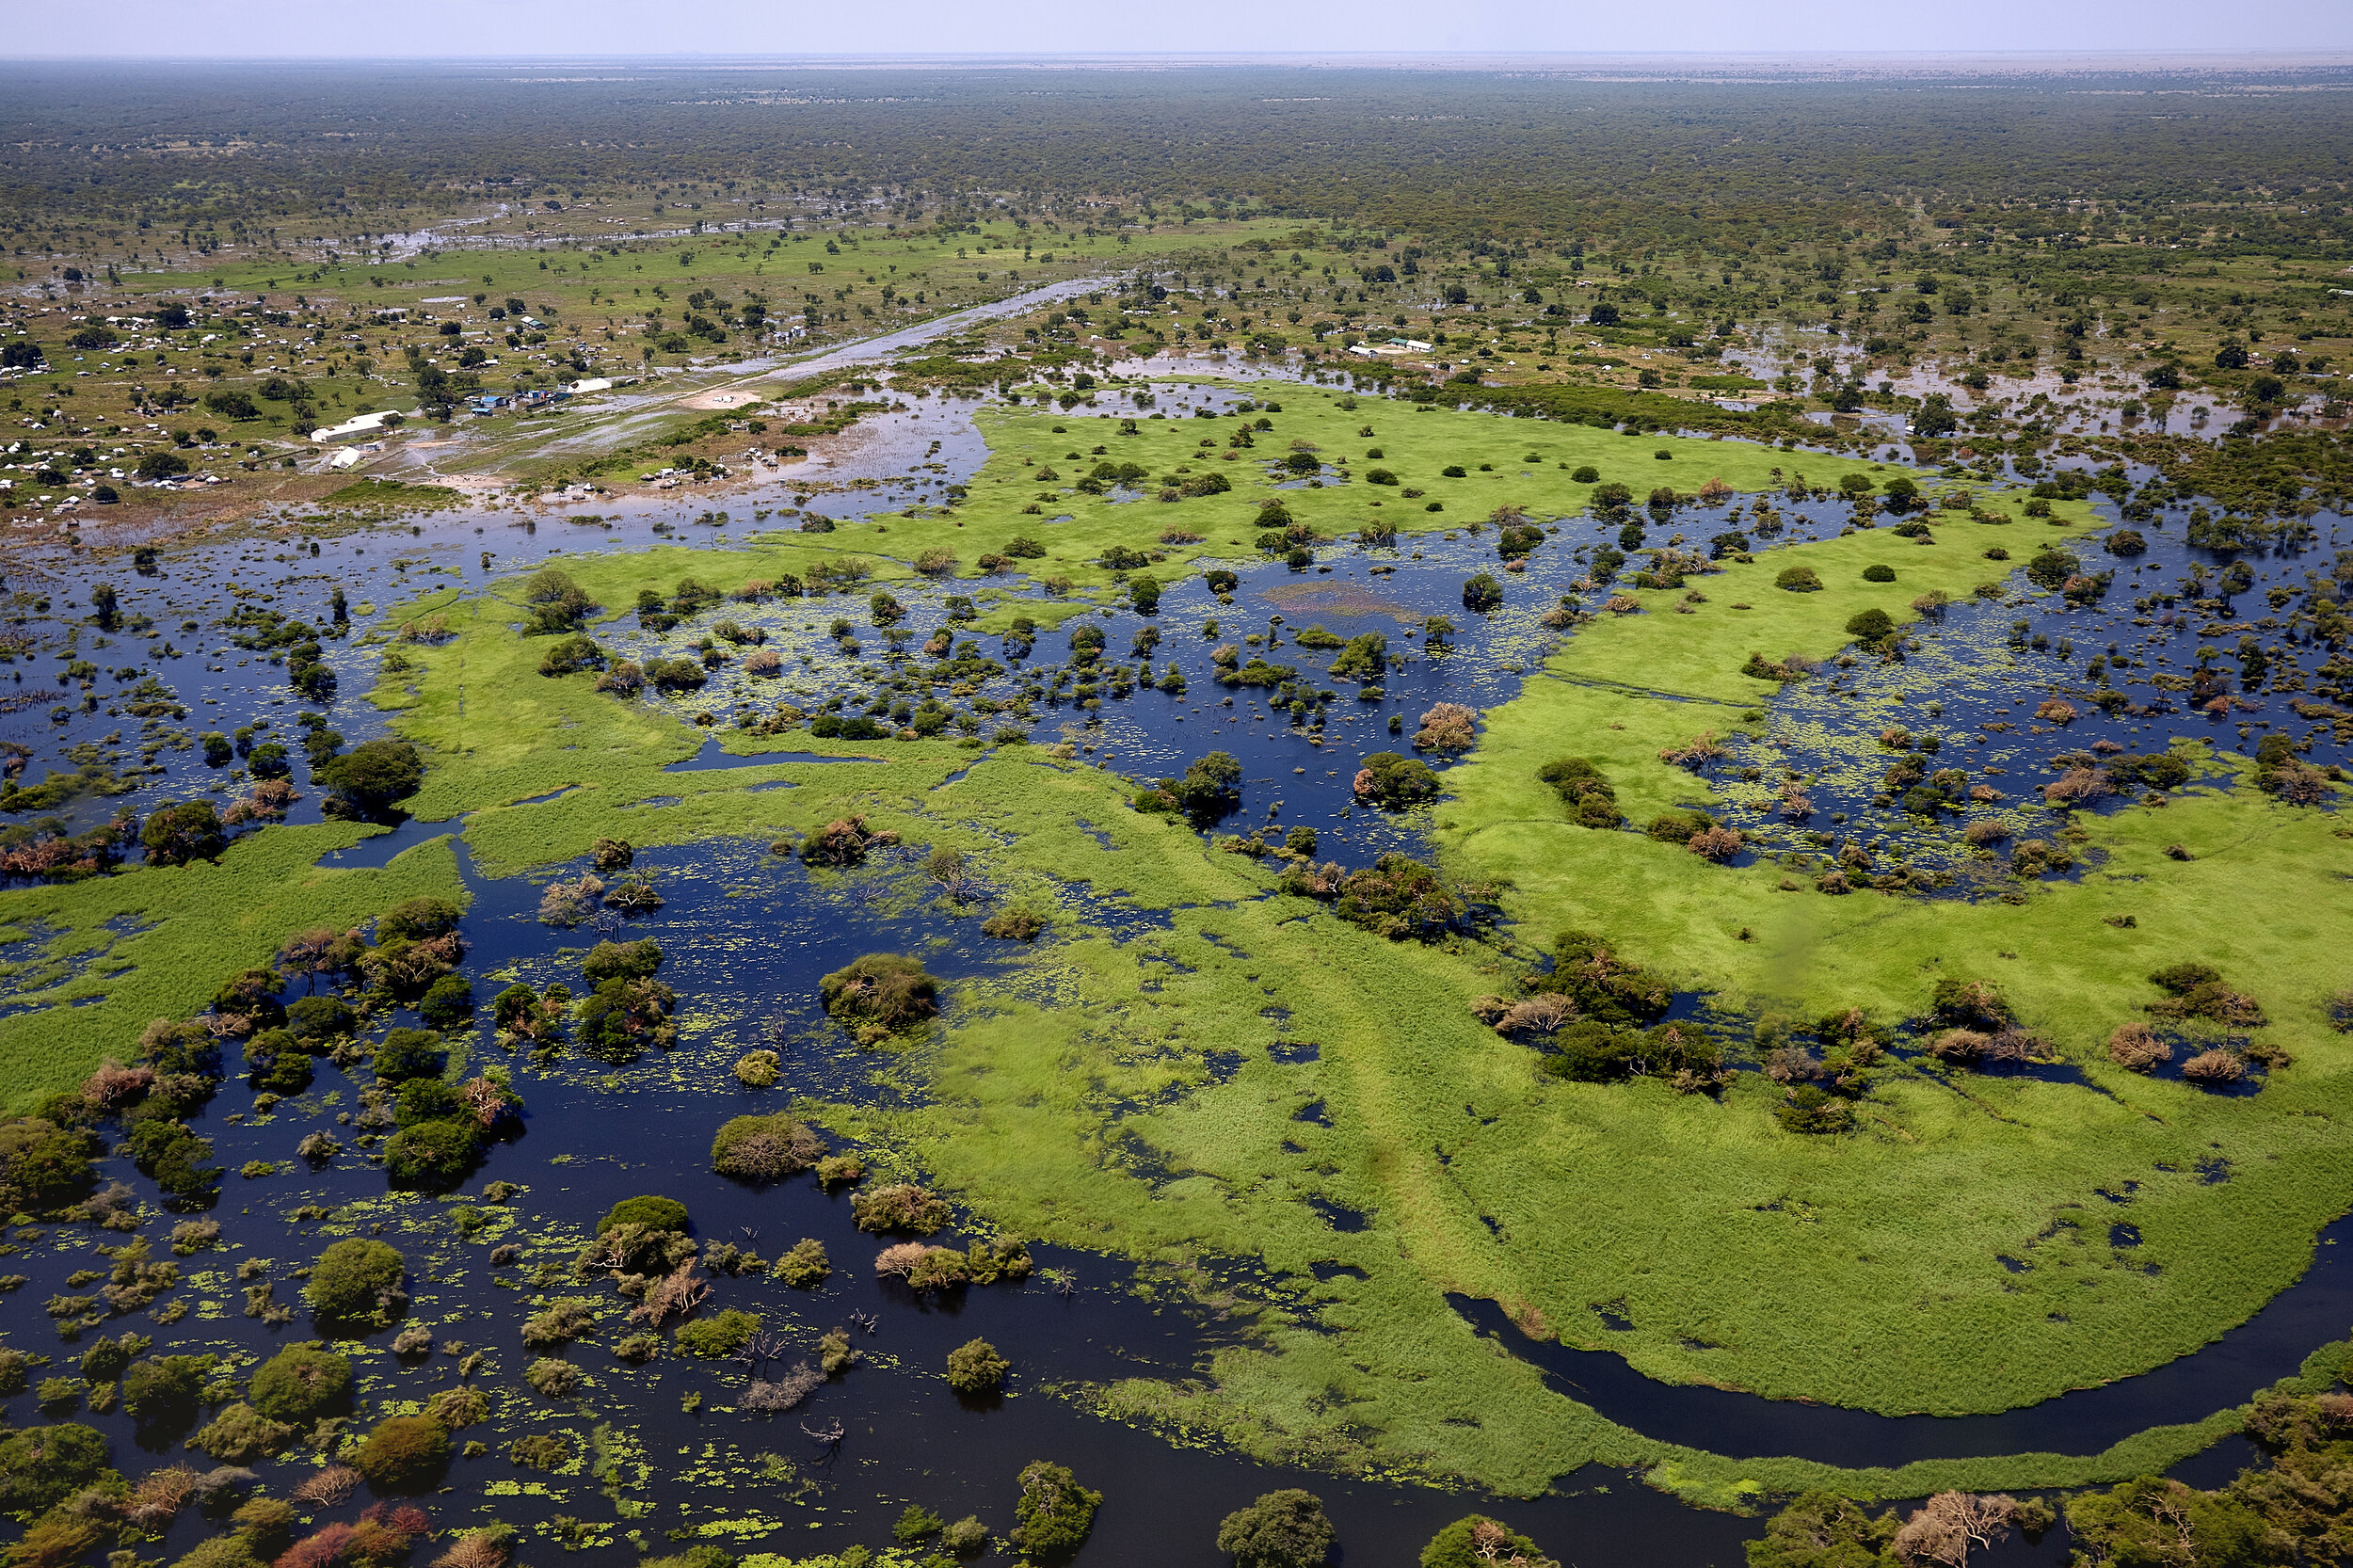 A view over the flooded areas near Pibor, South Sudan